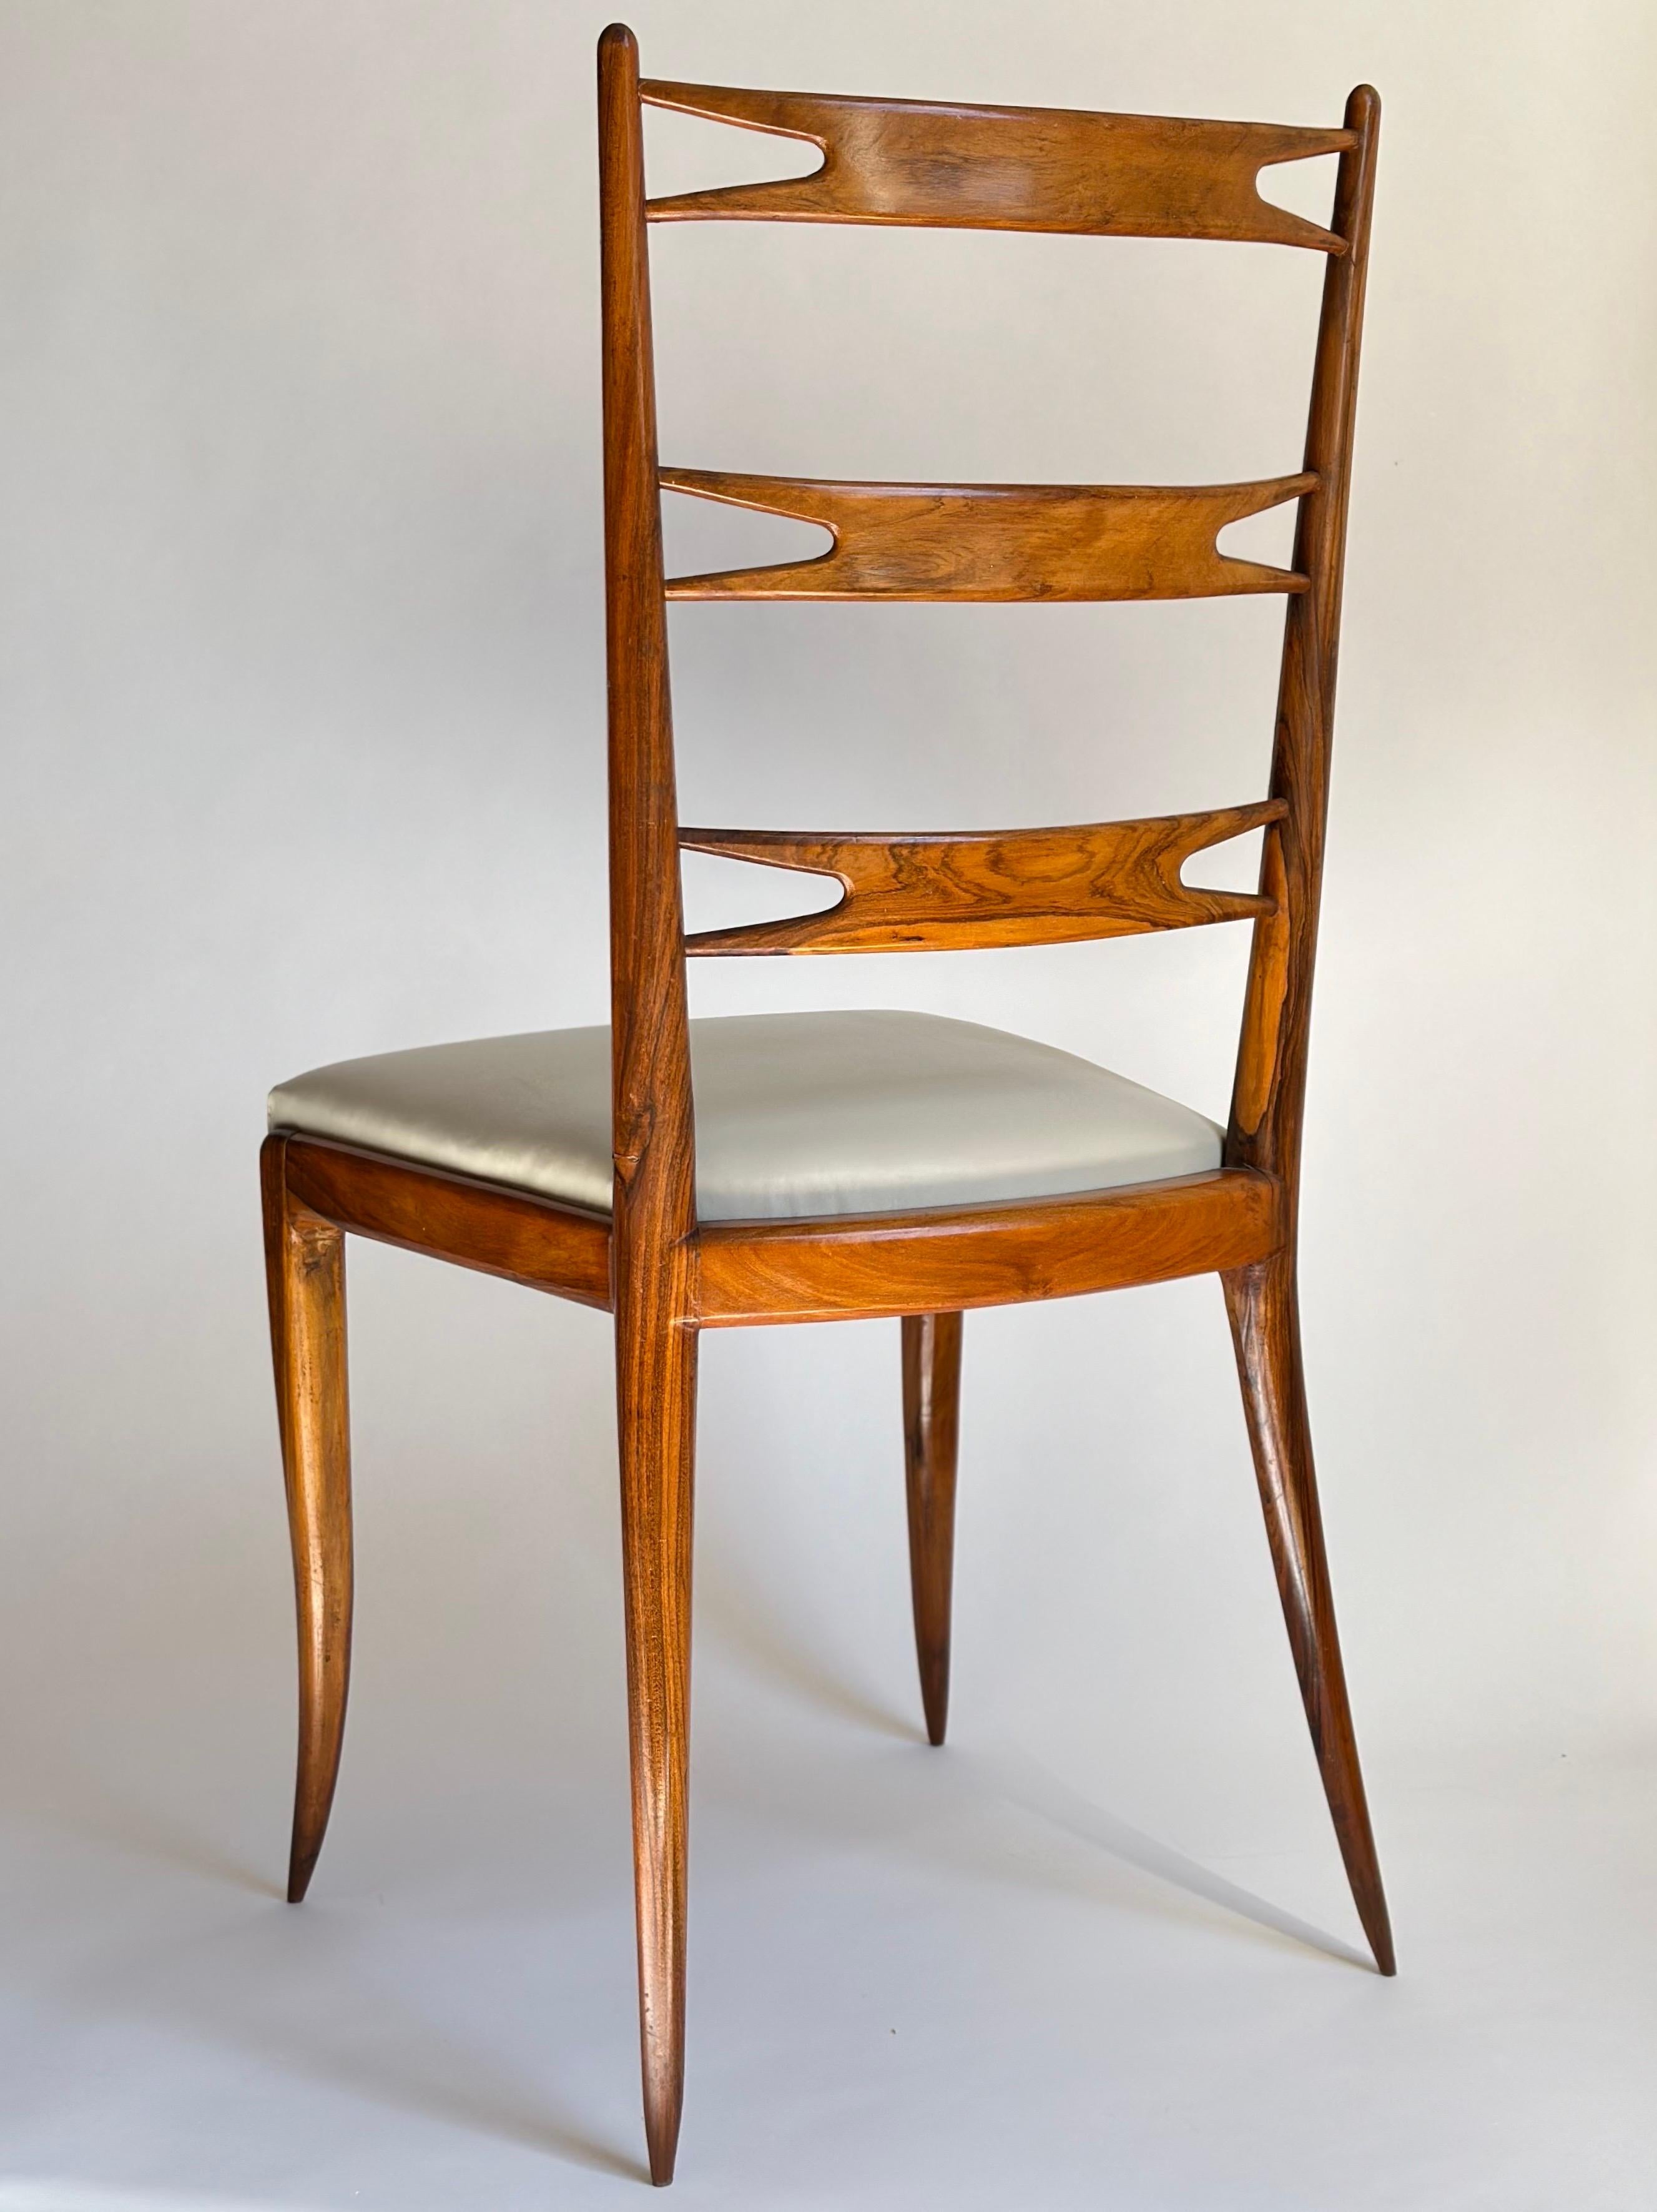 1950s modernist ladder-back chair executed in Brazilian rosewood with leather seat, designed by Giuseppe Scapinelli. Professionally restored with original patina left untouched and reupholstered in antique white leather. Retains partial label